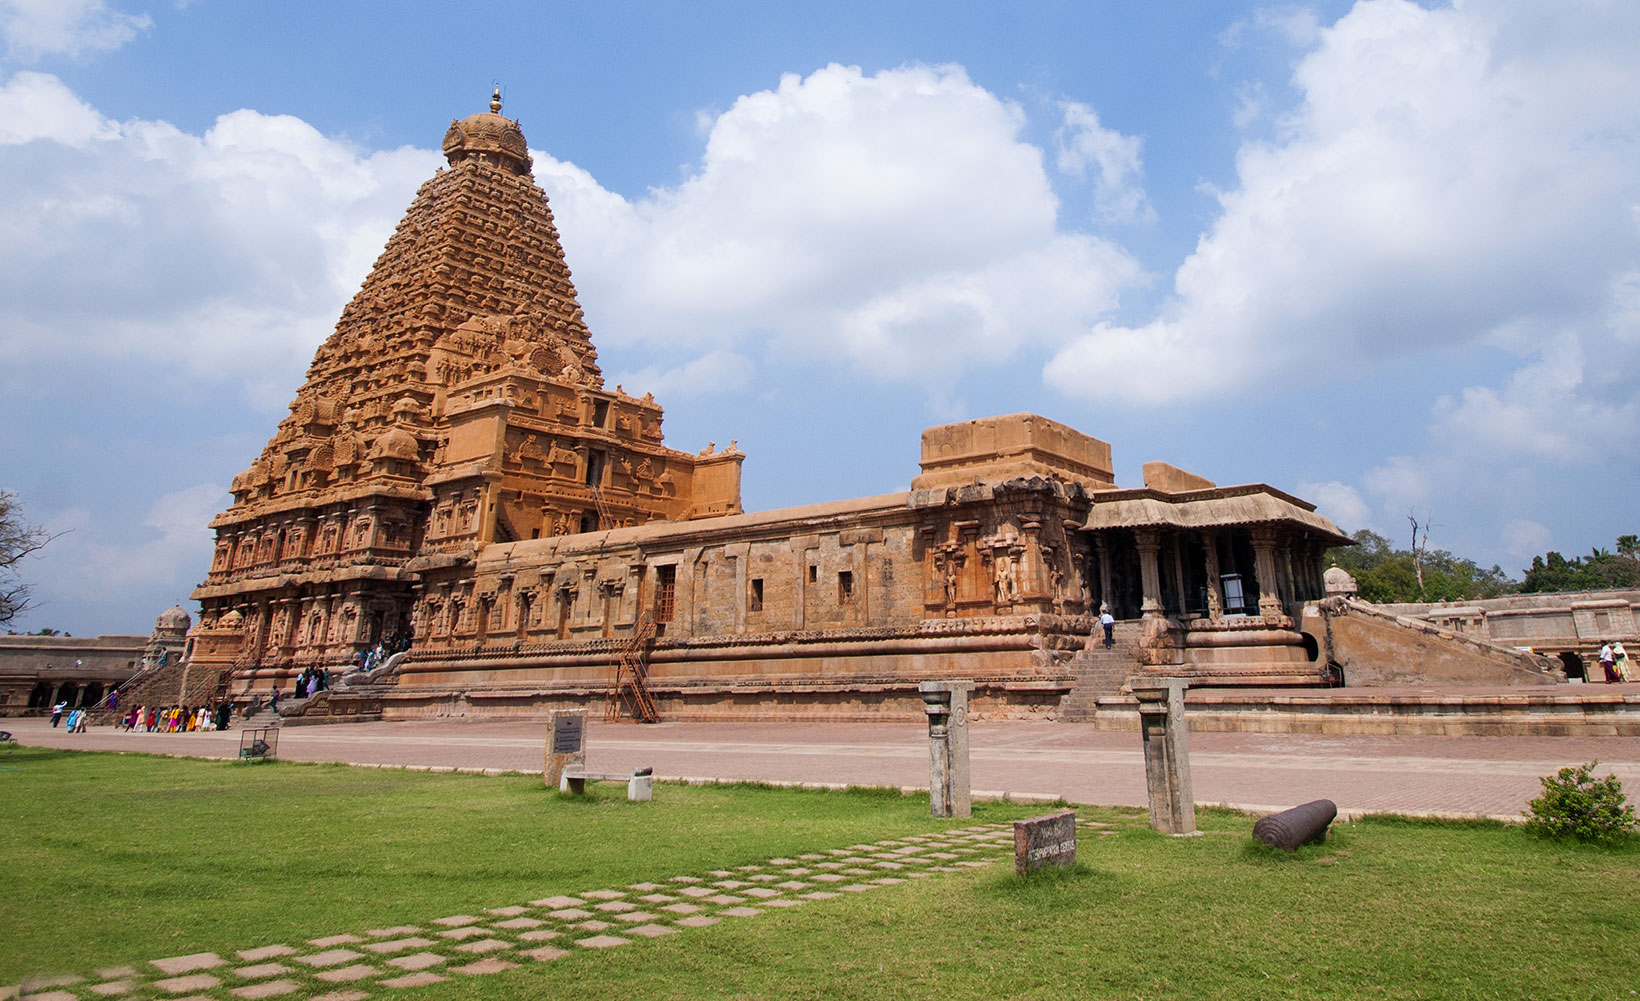 Consecration of Thanjavur’s Big Temple performed